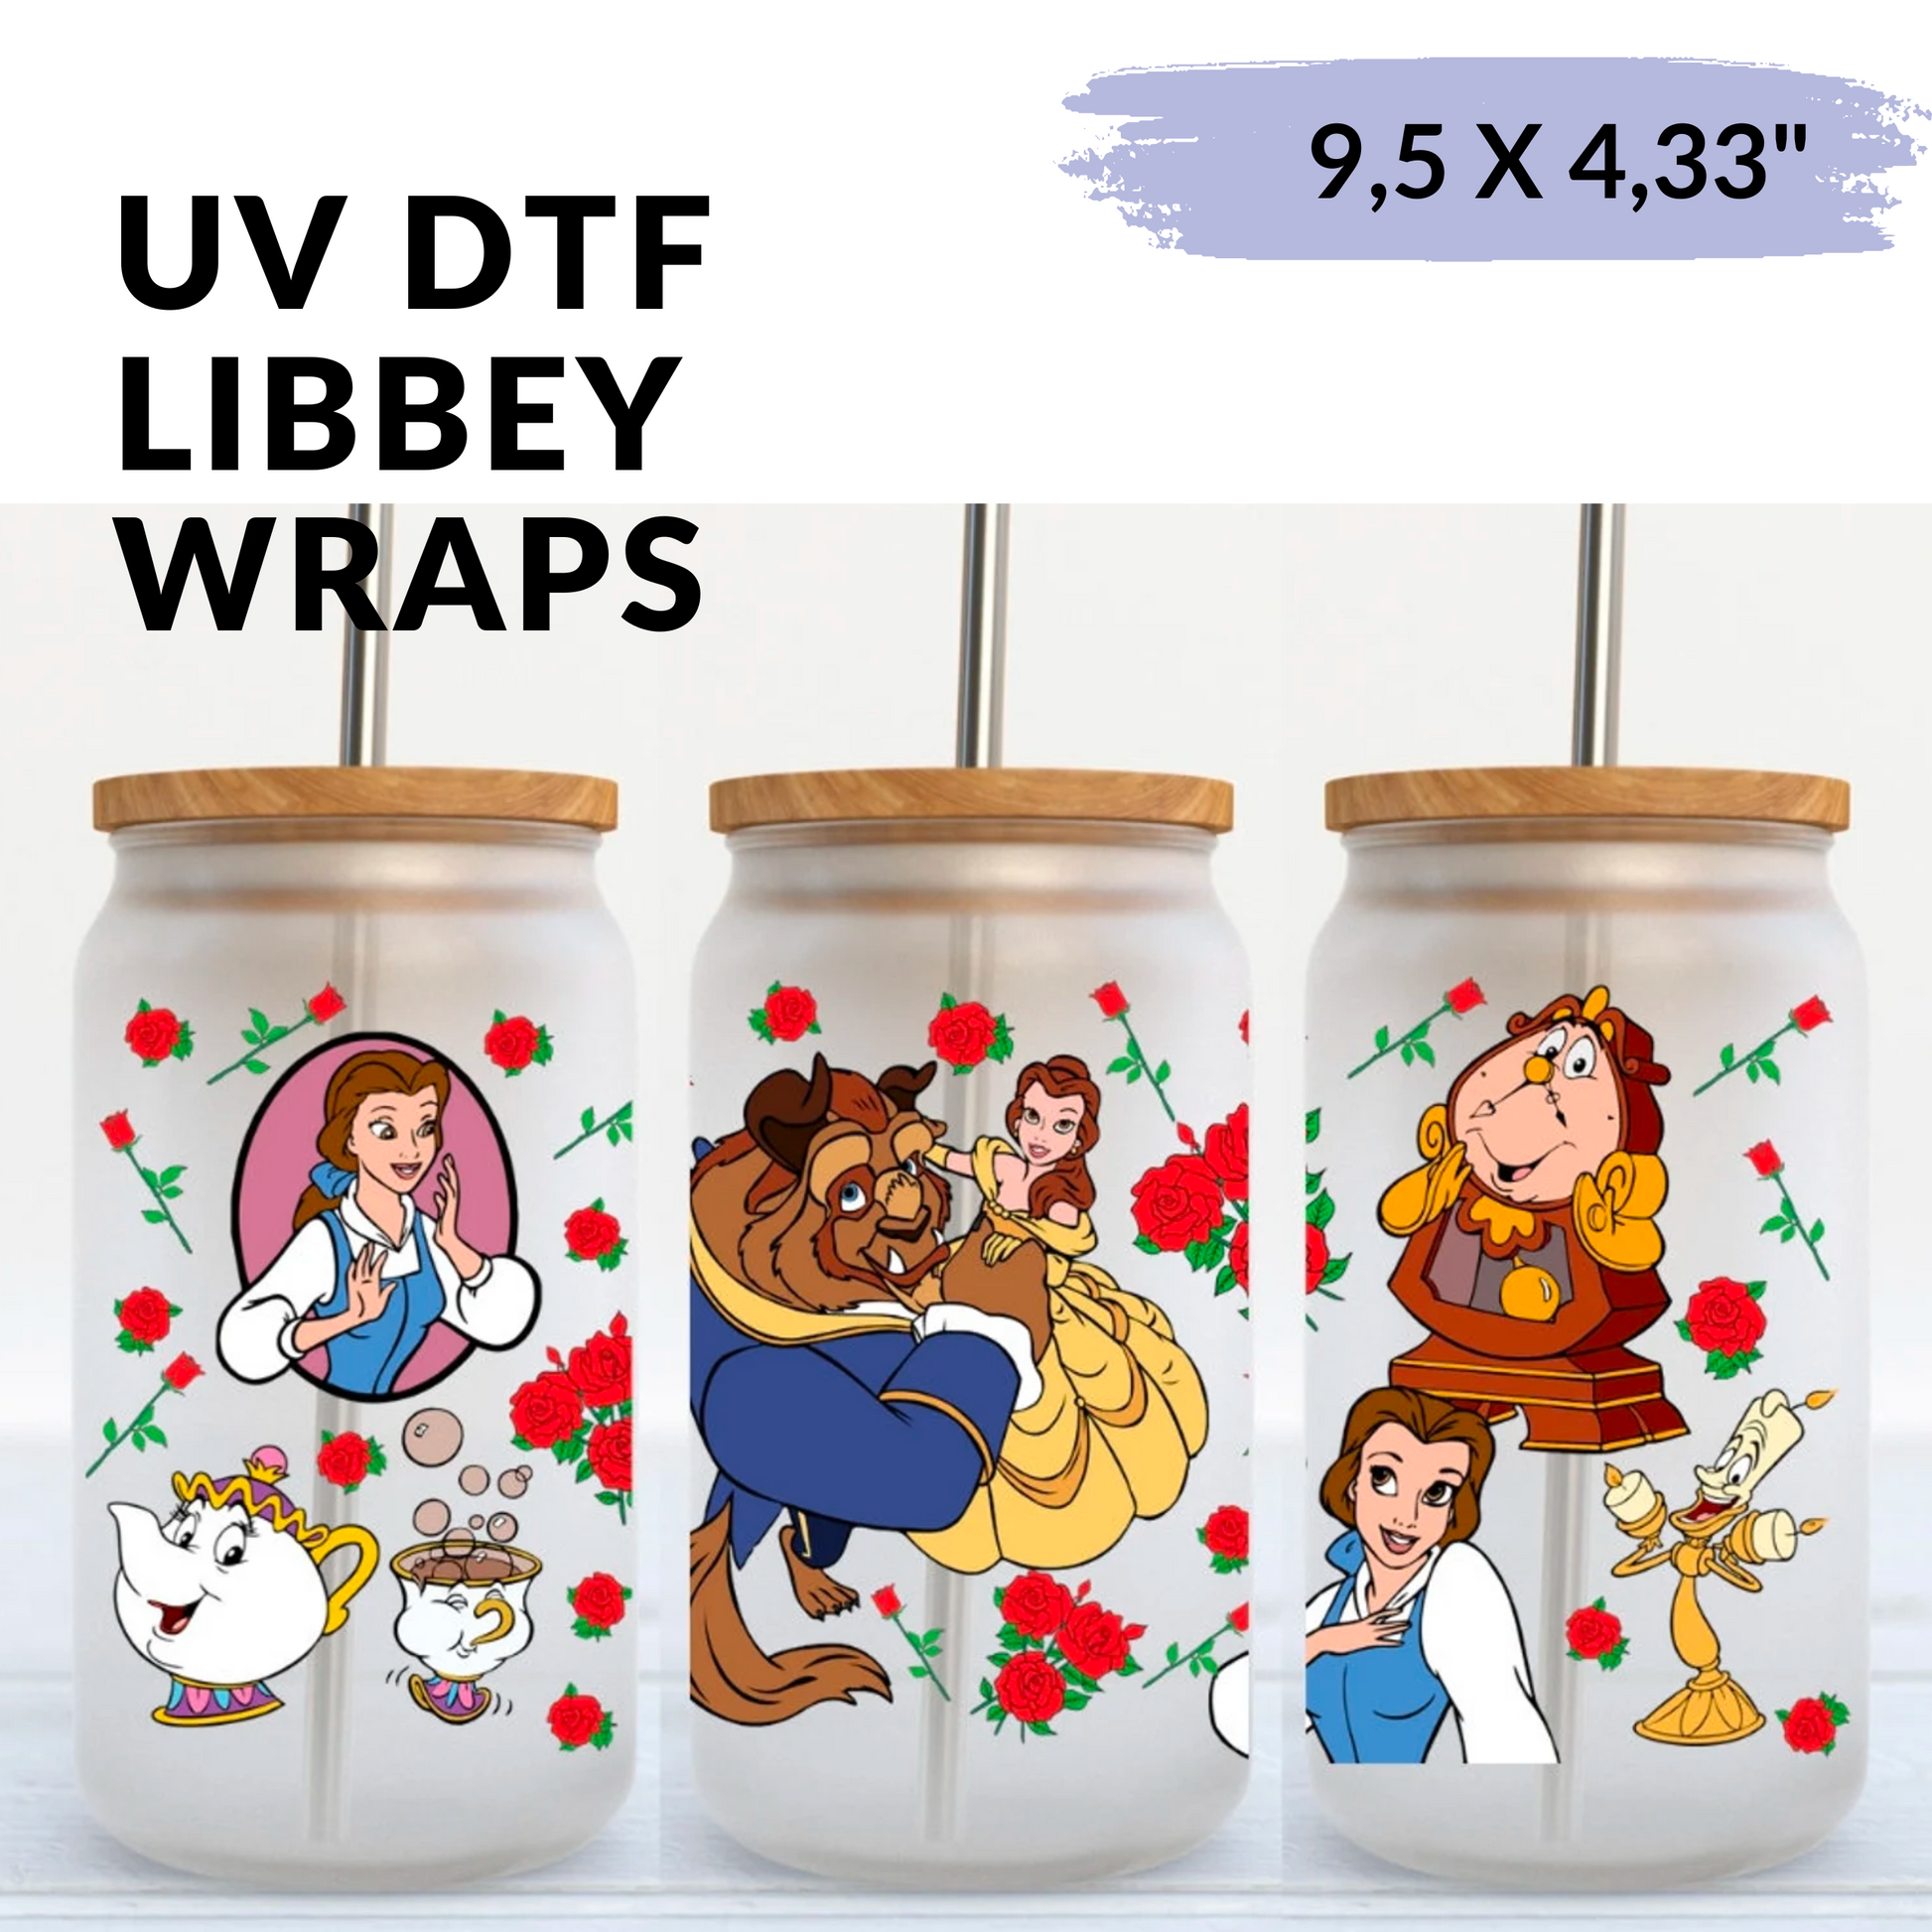 Beauty & Beast Decals Collection [EXCLUSIVE UV DTF - 16oz Glass Can]